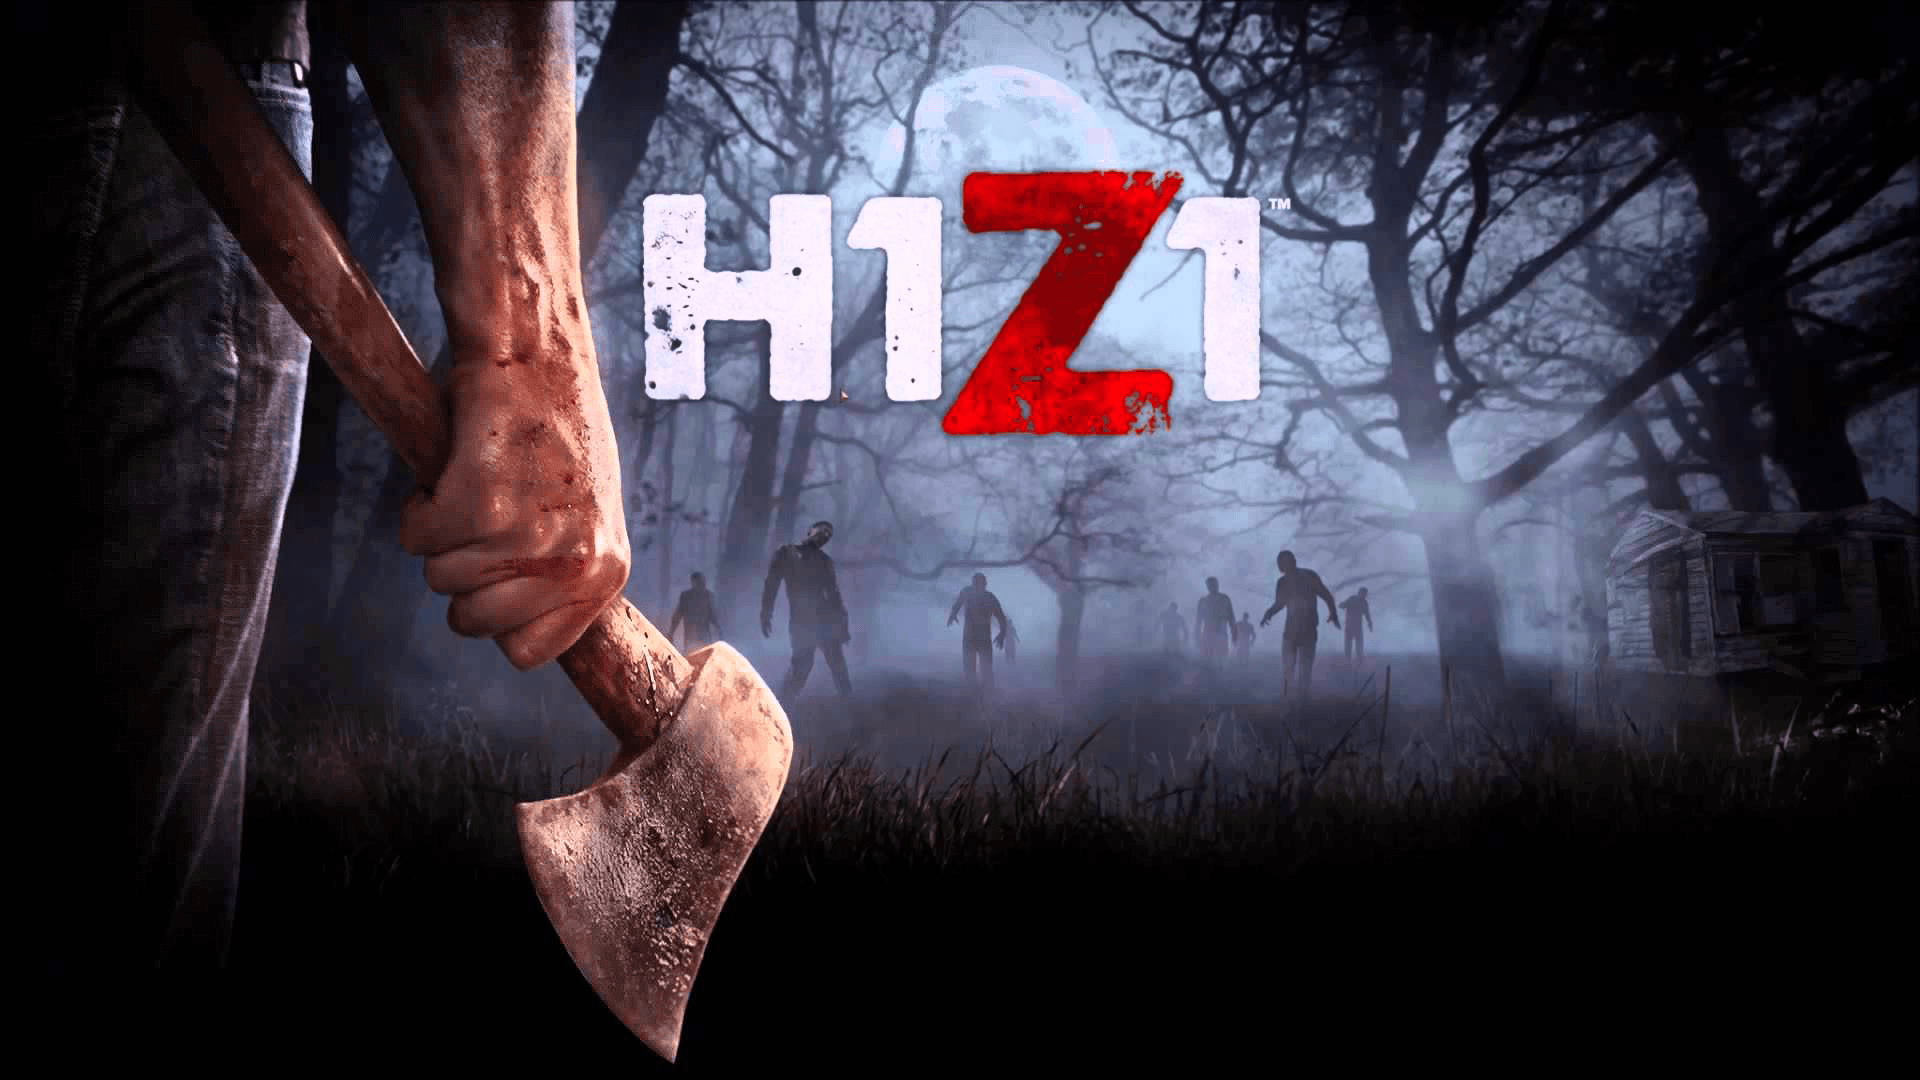 H1Z1 Logo - New H1Z1 Producer Wants To Add Tension & Challenge, Improve Gunplay